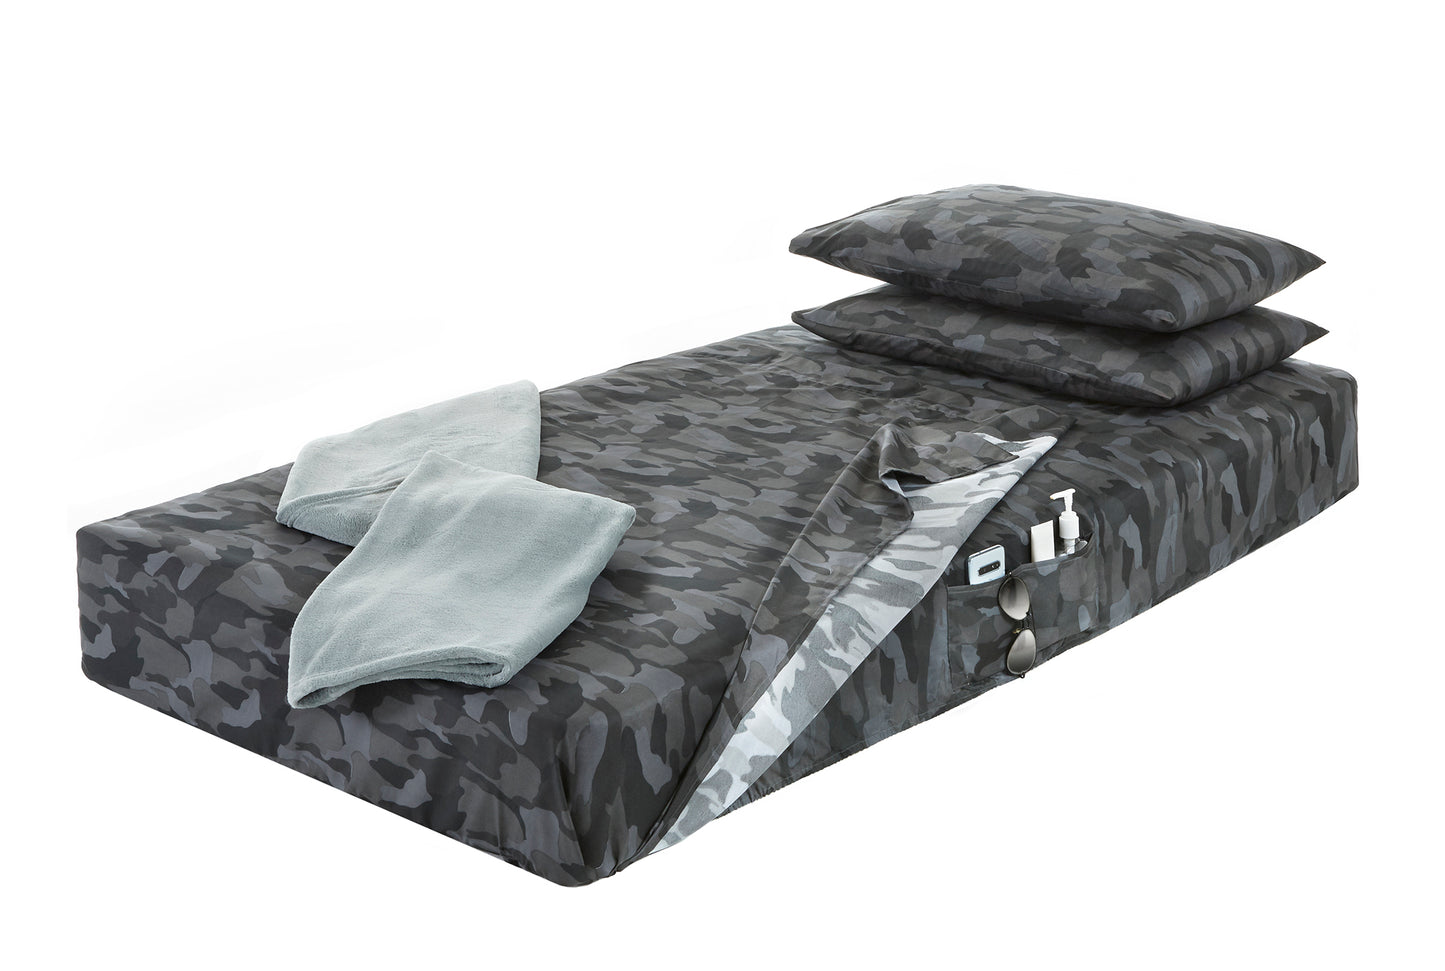 Camouflage Bed Sheet Set, Fits Semi-Truck/RV/Camper Mattresses – Assorted Sizes